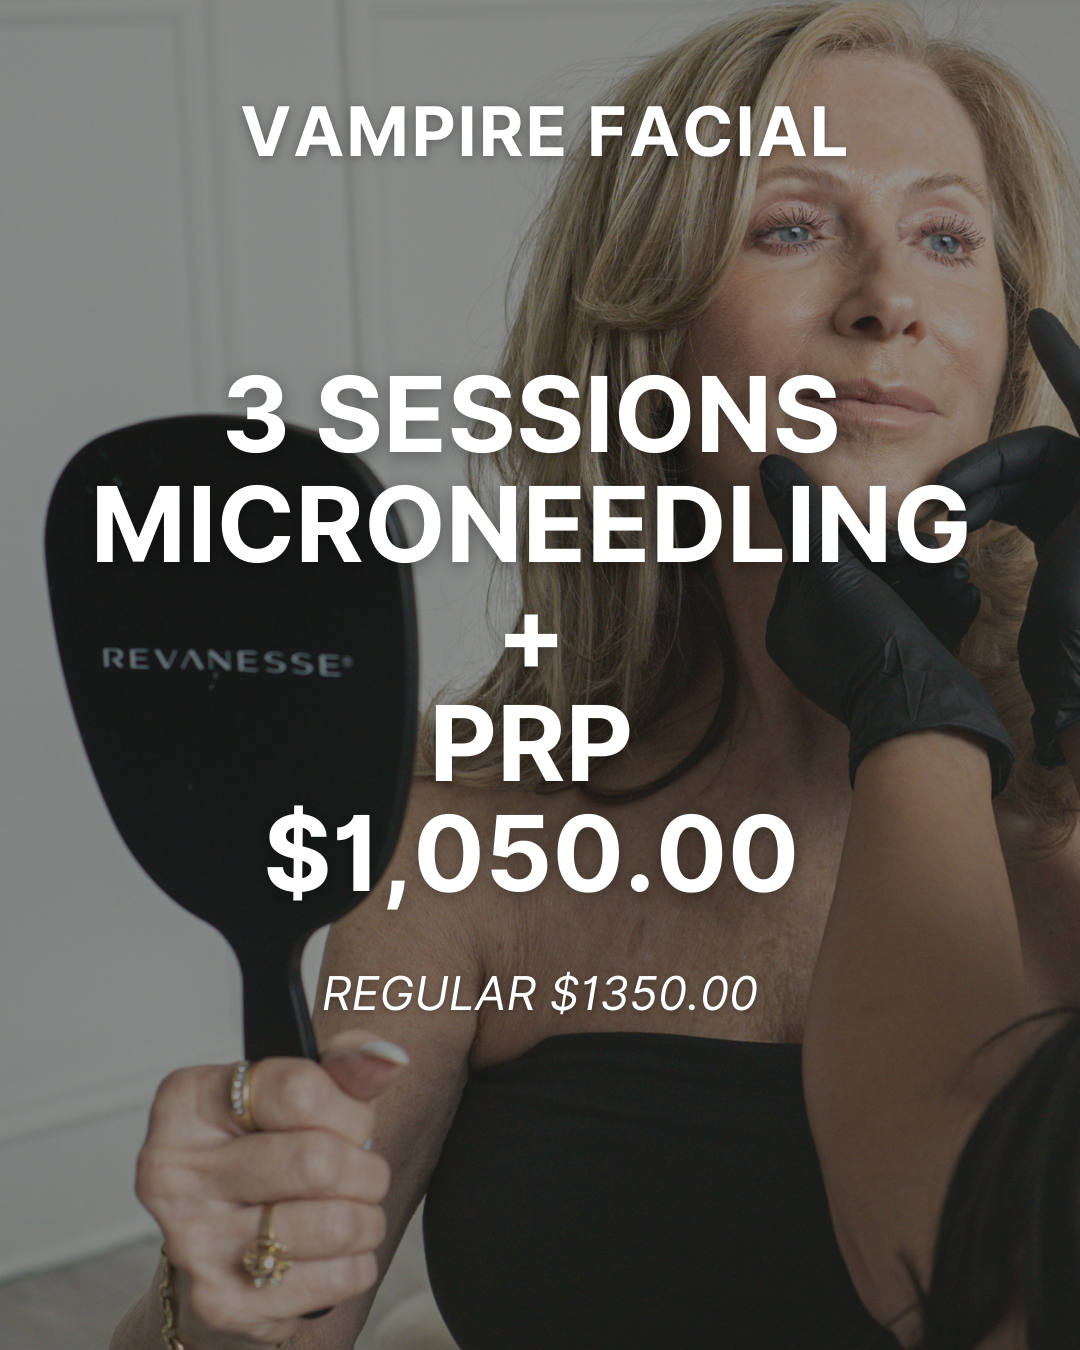 microneedling and prp facial, vampire facial special promotion